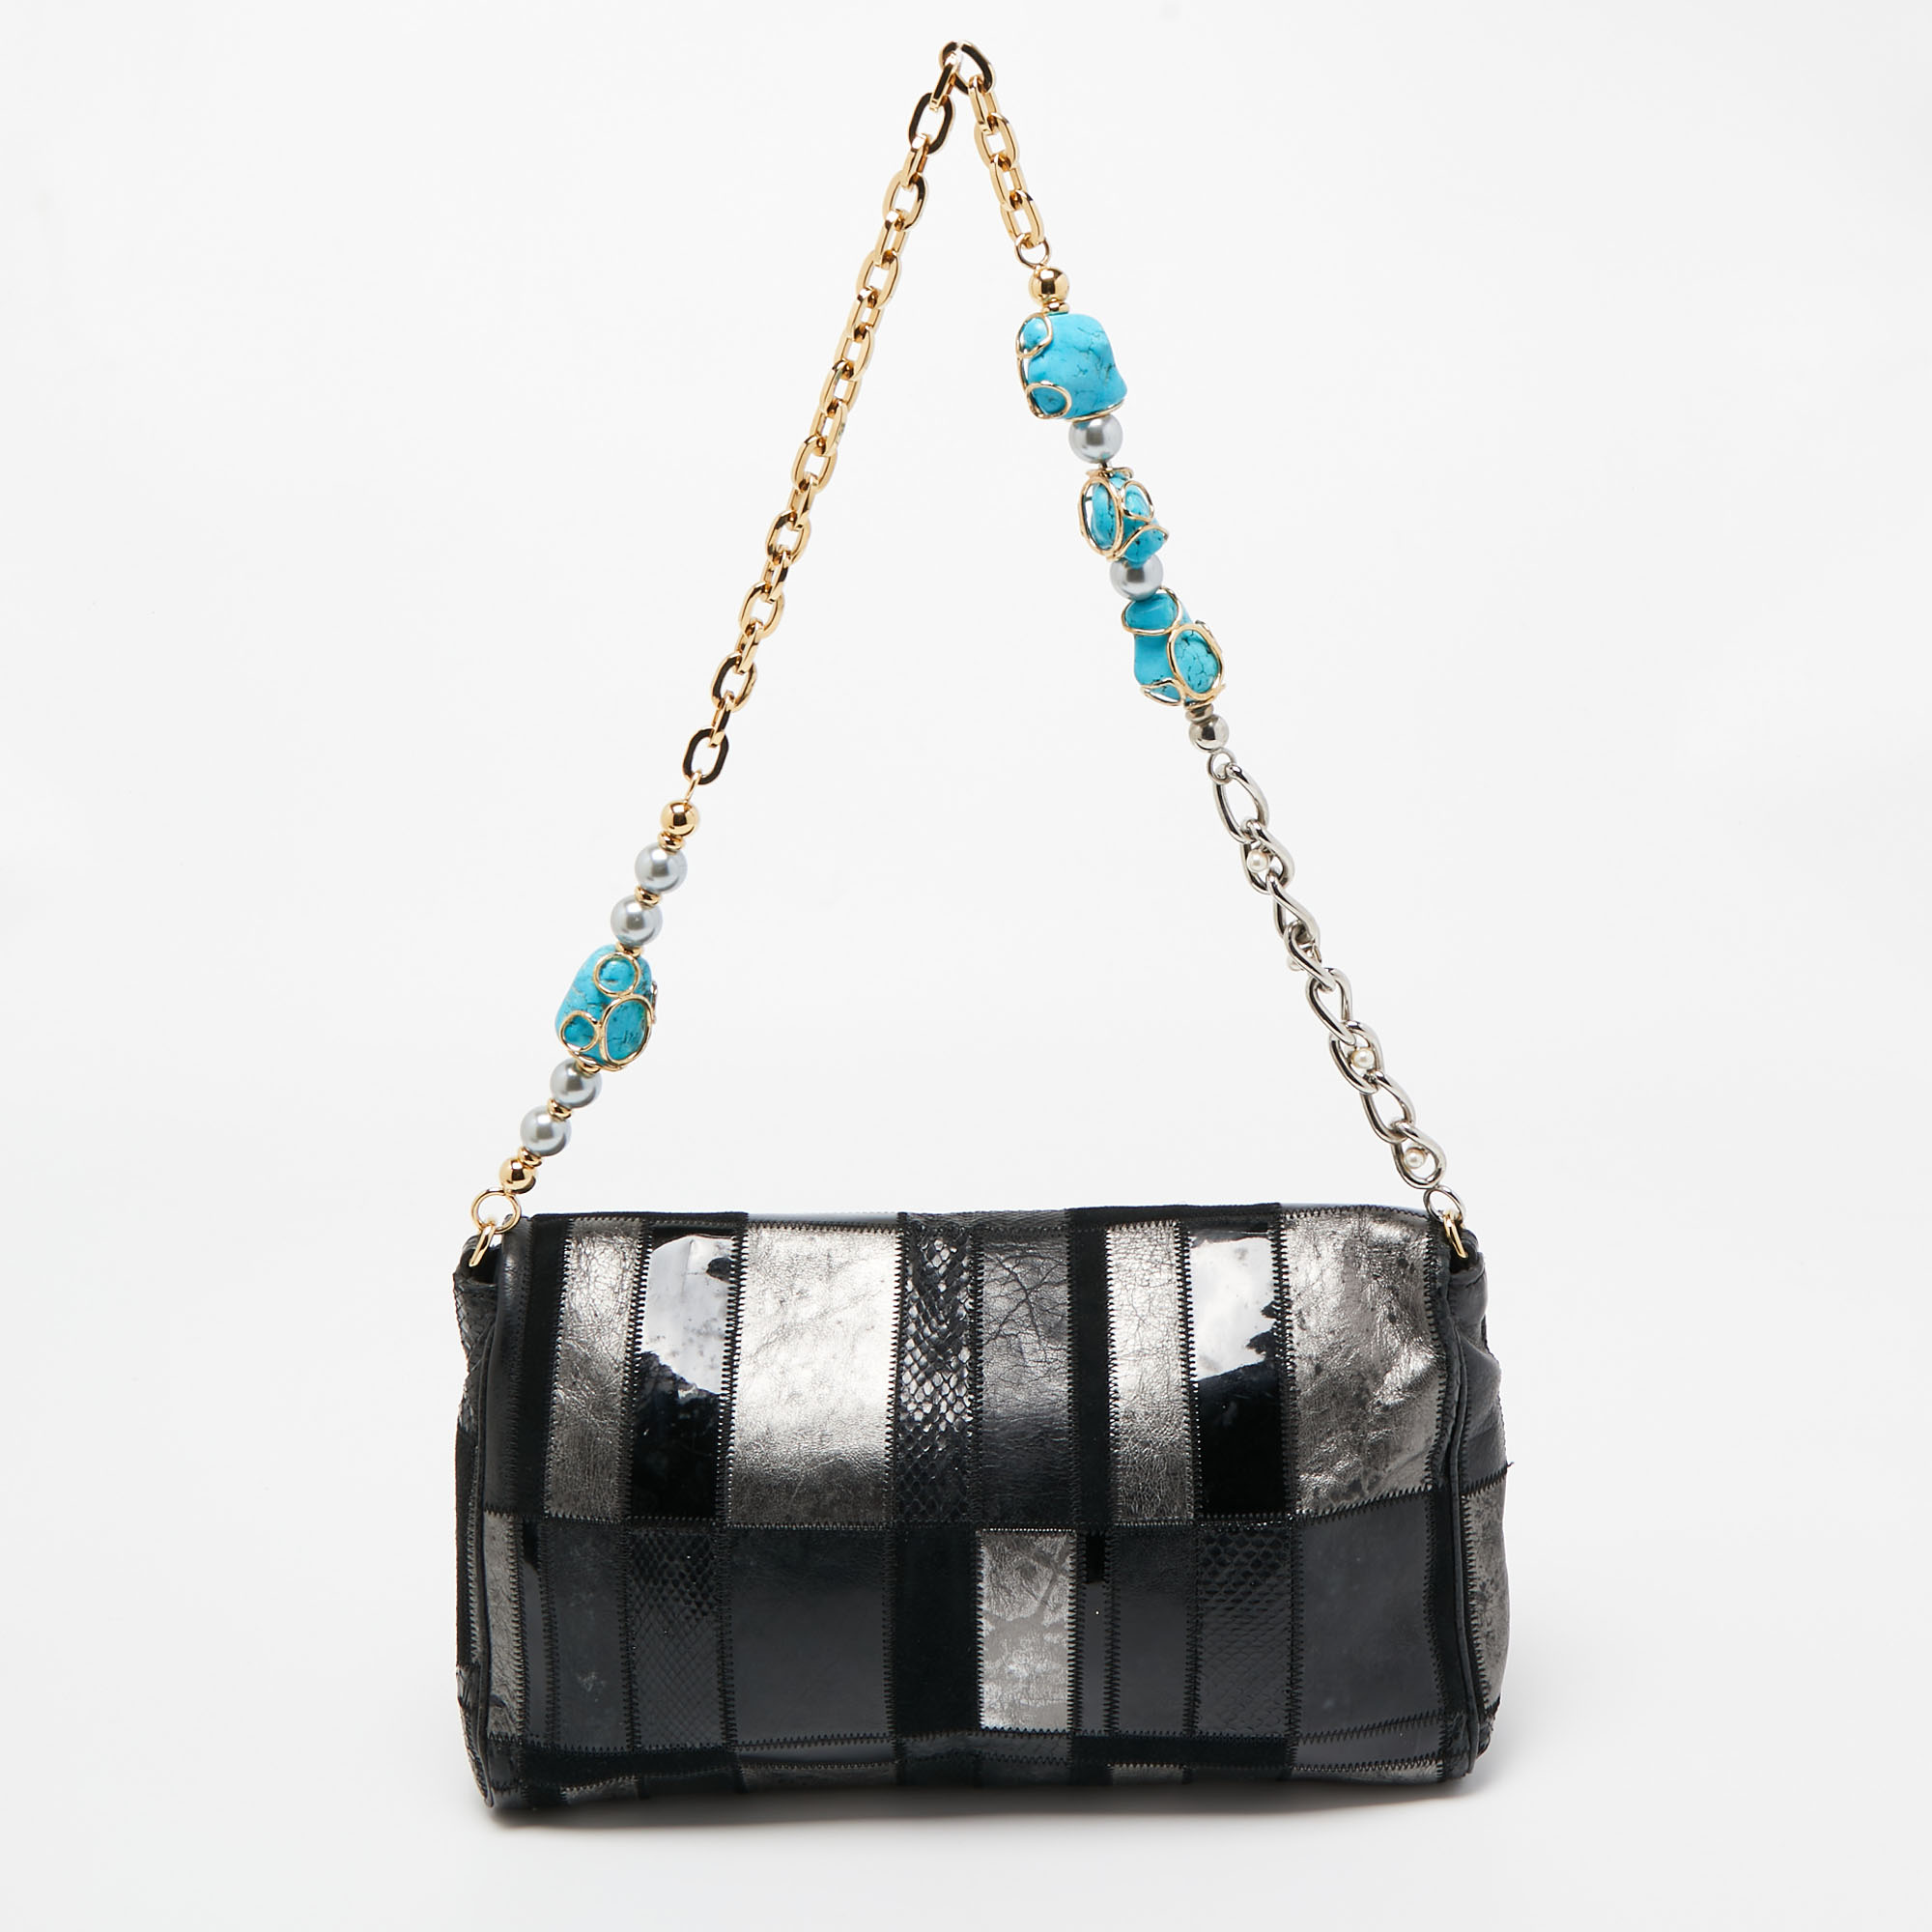 Dolce & Gabbana Black/Grey Mixed Leather And Snakeskin Patchwork Chain Bag